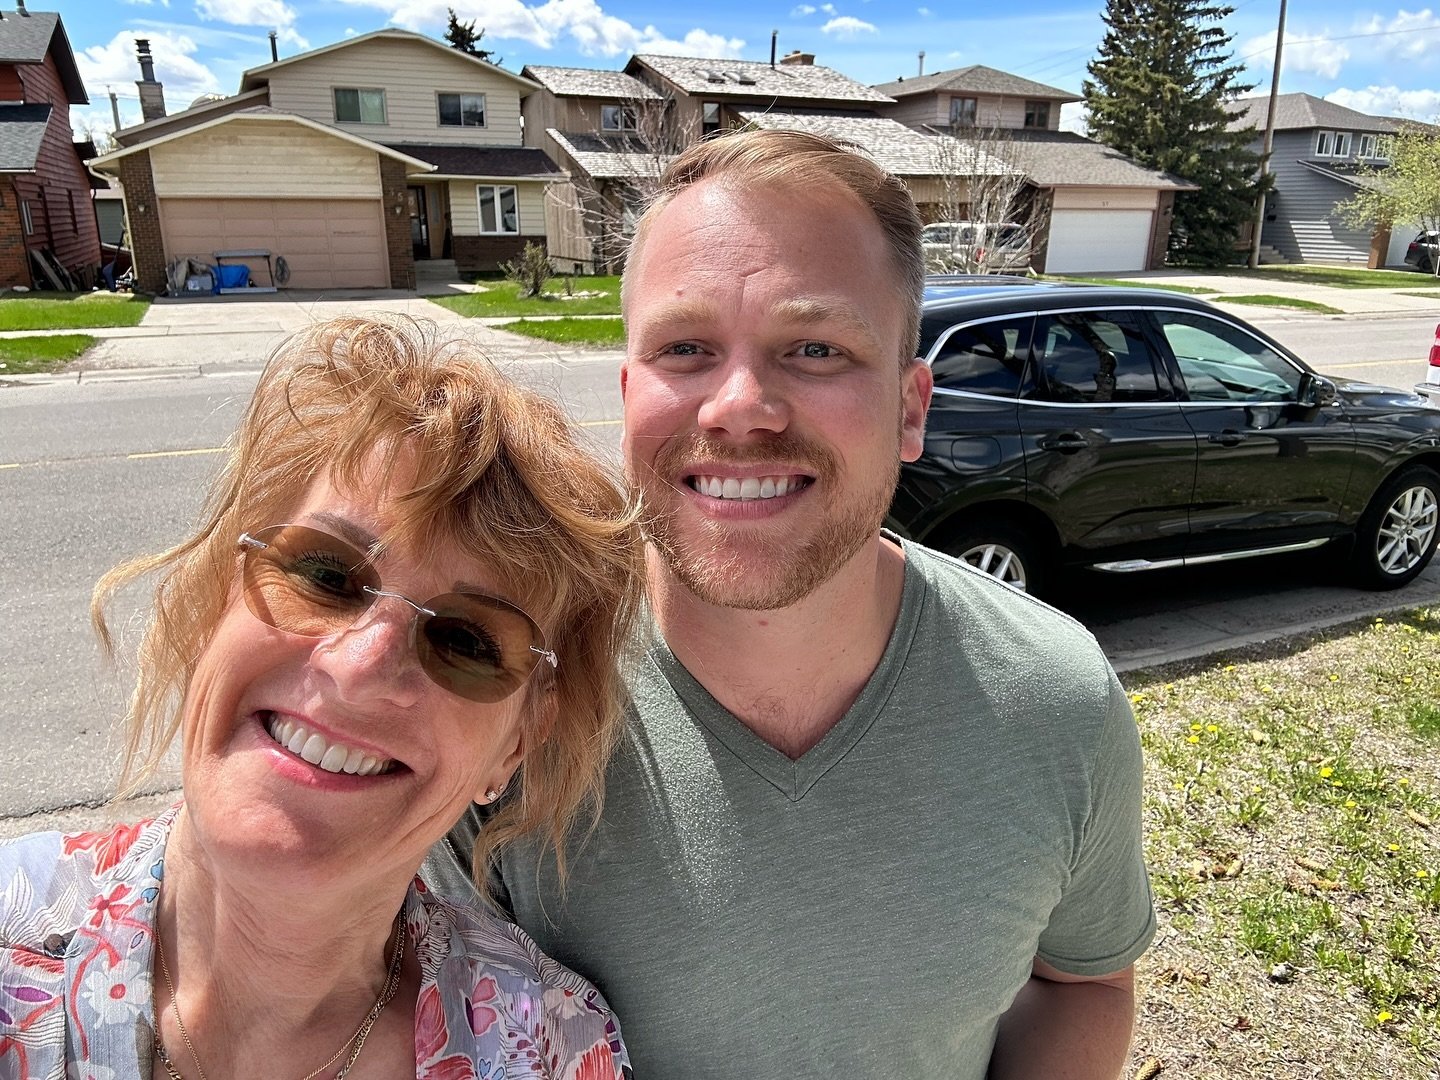 Any day is a good day working with the amazing @carlintherealtor !

Thank you for inviting me over to Hawkwood for a staging consultation!

Can&rsquo;t wait to see your fabulous new listing go live soon

#teamwork #toprealtor #successfulteam #homesta